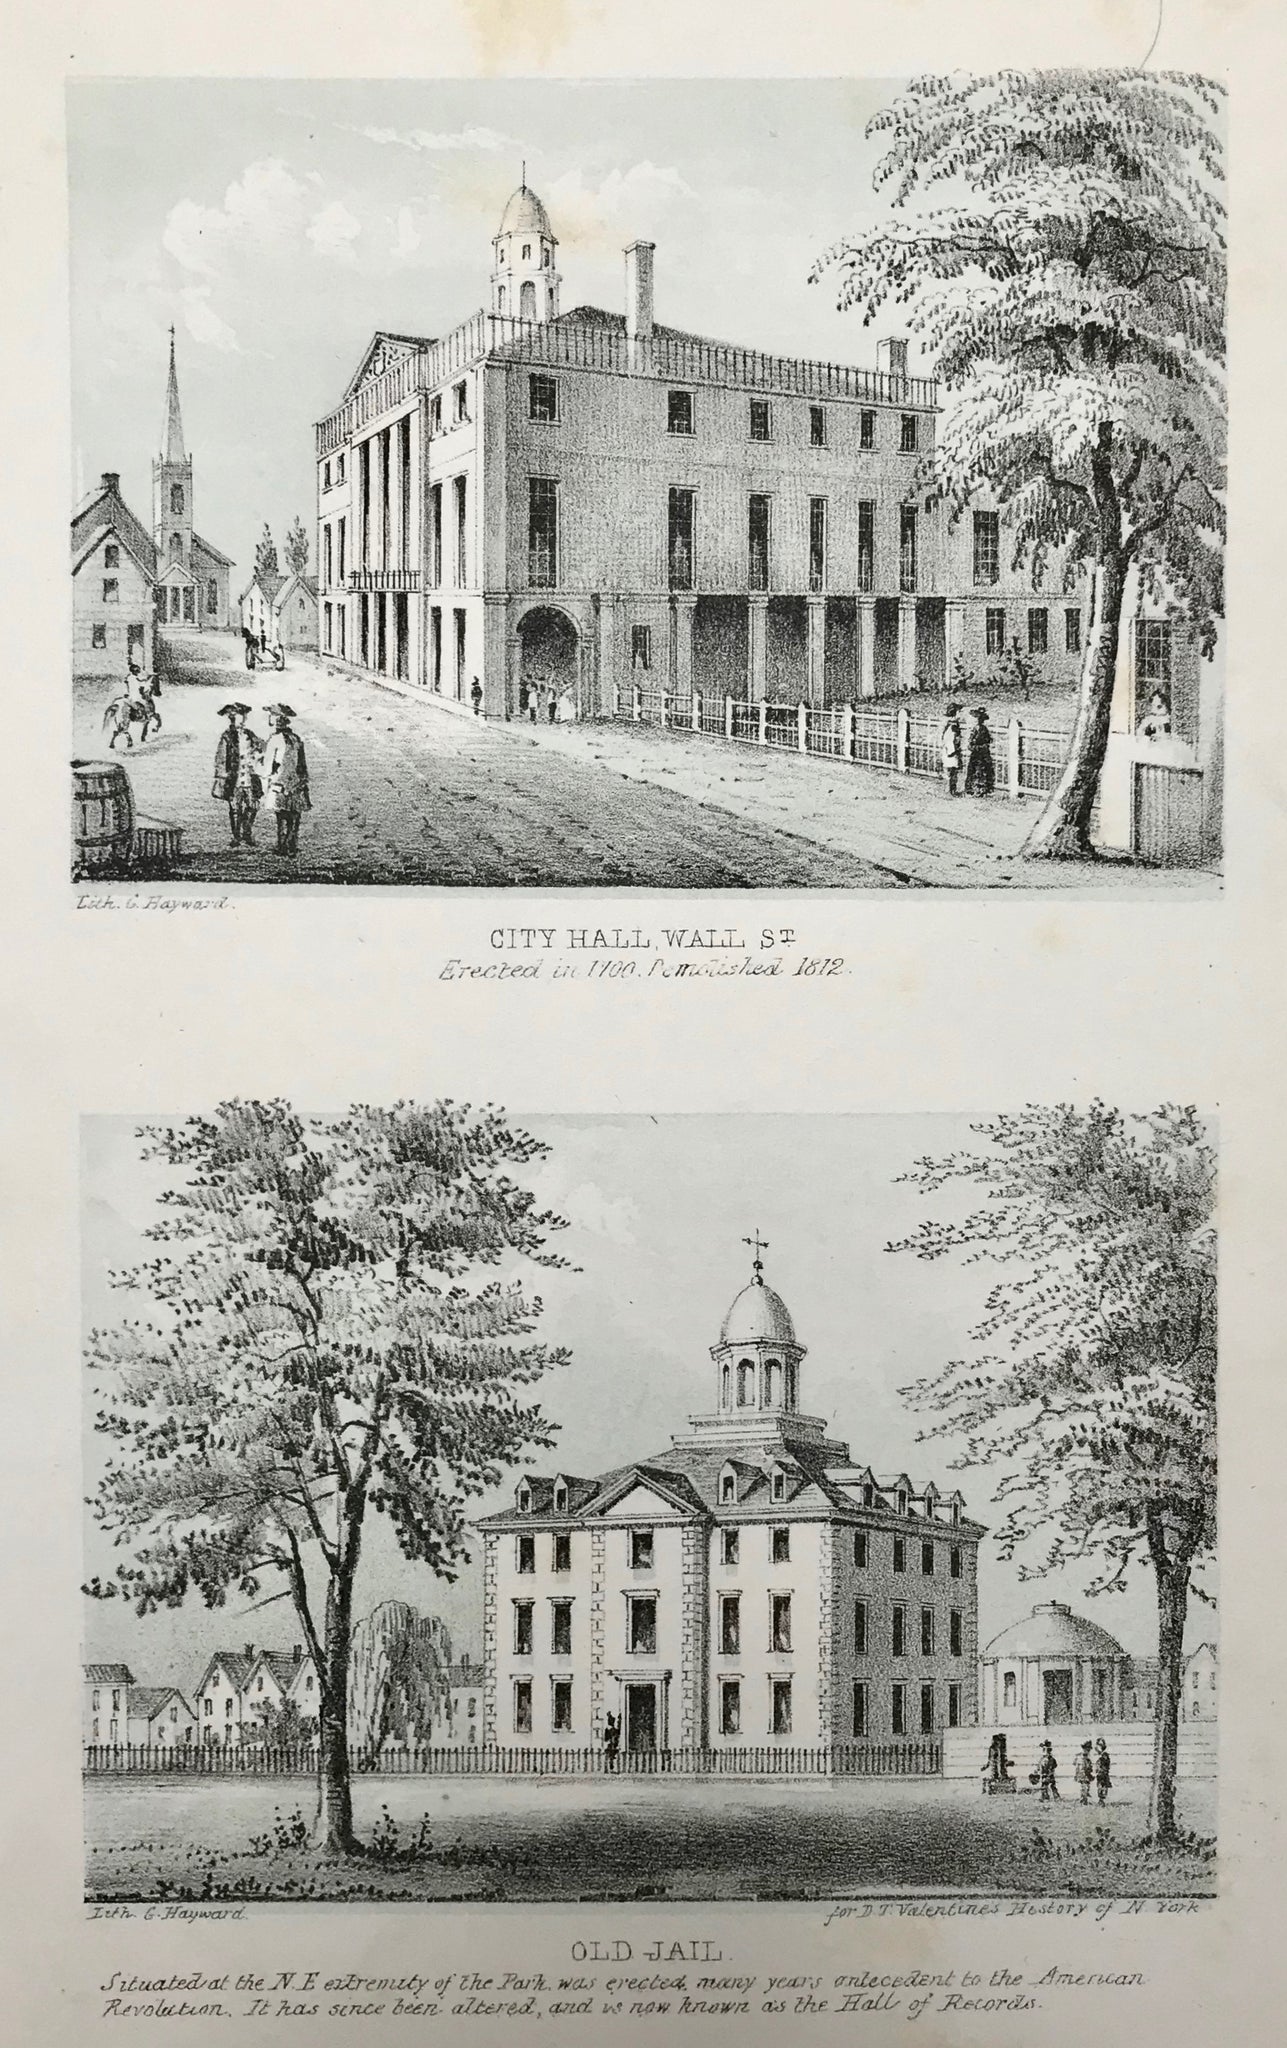 Upper image: "City Hall, Wall St. Erected in 1700. Demolished in 1812. " Lower image: " Old Jail. Situated at the N.E. extremity of the Park, was erected many years antecedent to the american Revolution. It was never alterted and is now known as the Hall of Records."  Lithographs by G. Hayward